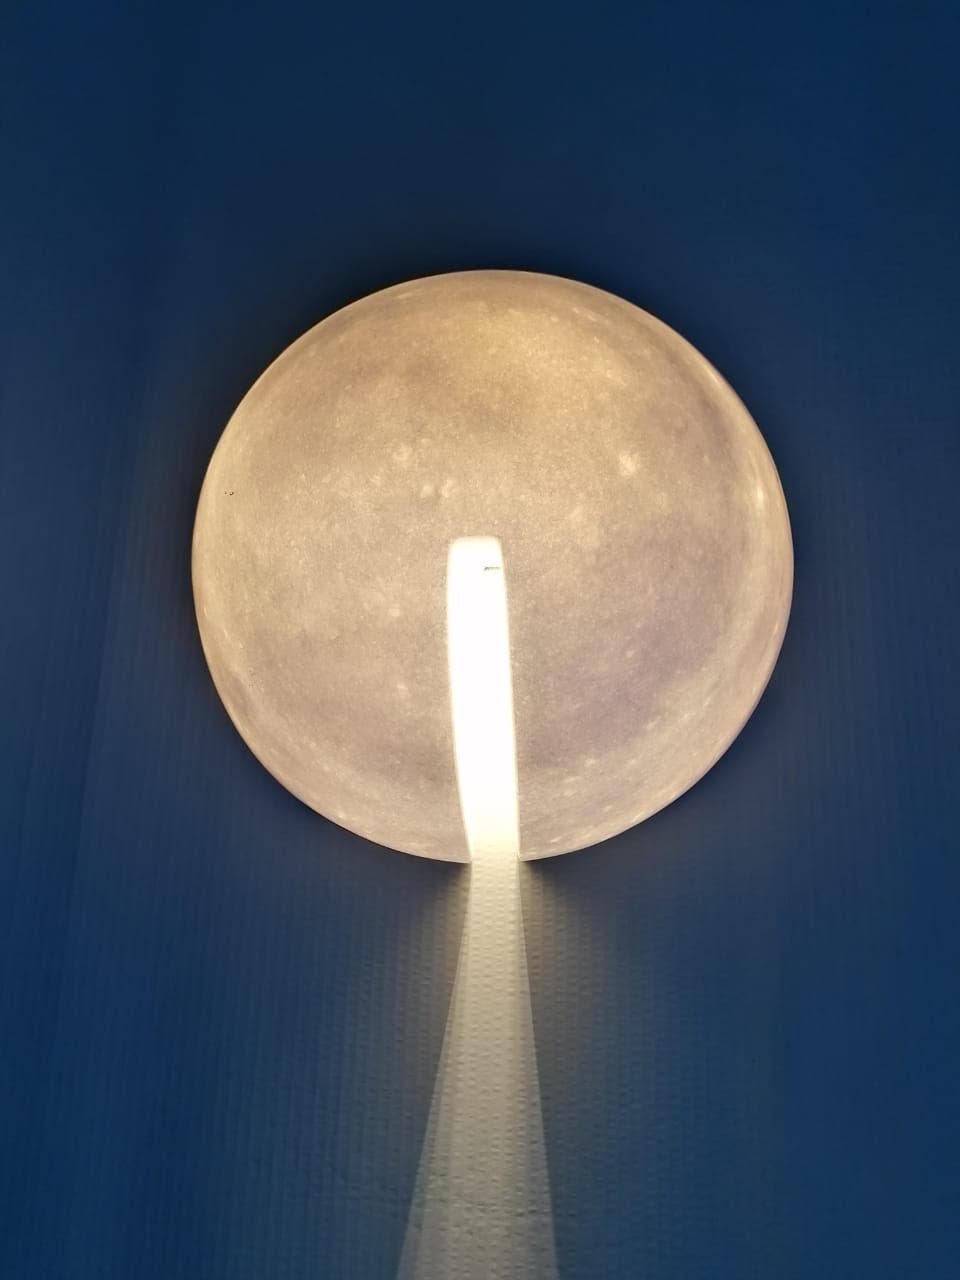 Marble wall lamp by Tom von Kaenel
Dimensions: D 34 cm
Materials: Marble

All the artworks of Tom von Kaenel are unique, handcrafted by himself.
The stones all come from the surrounding marble quarries of the island. The Naxian marble is of